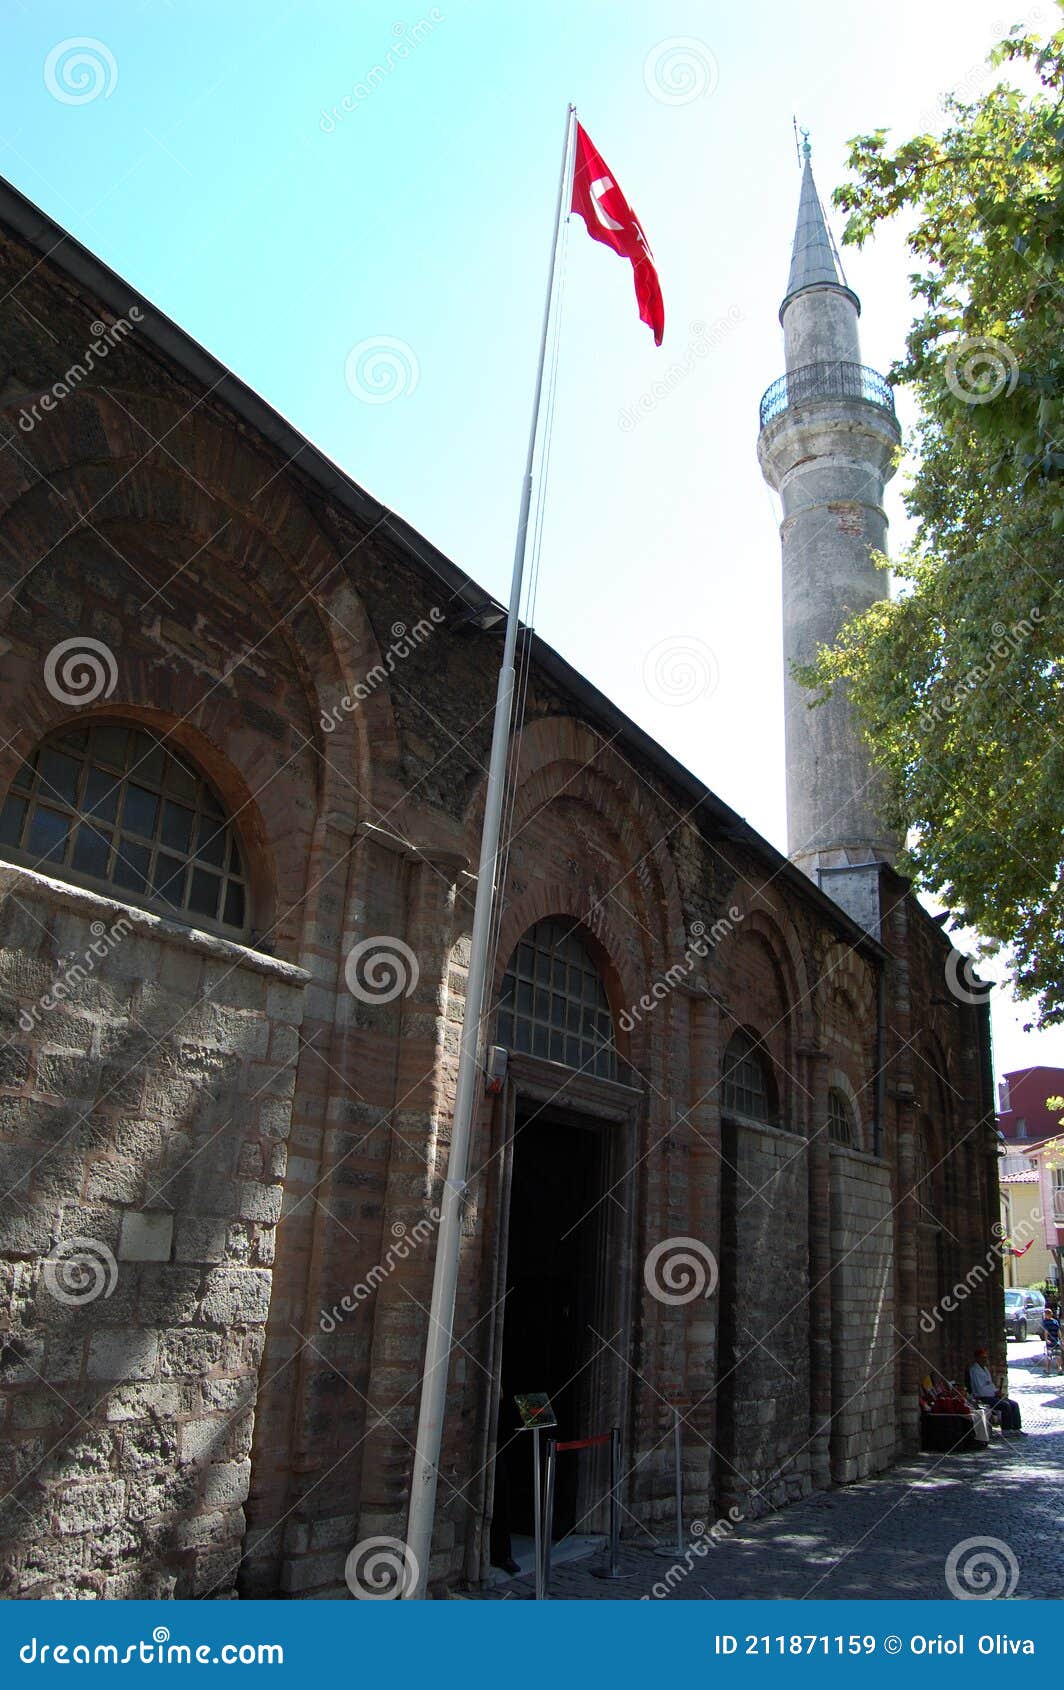 view of the main places and monuments of istanbul (turkey). minaret